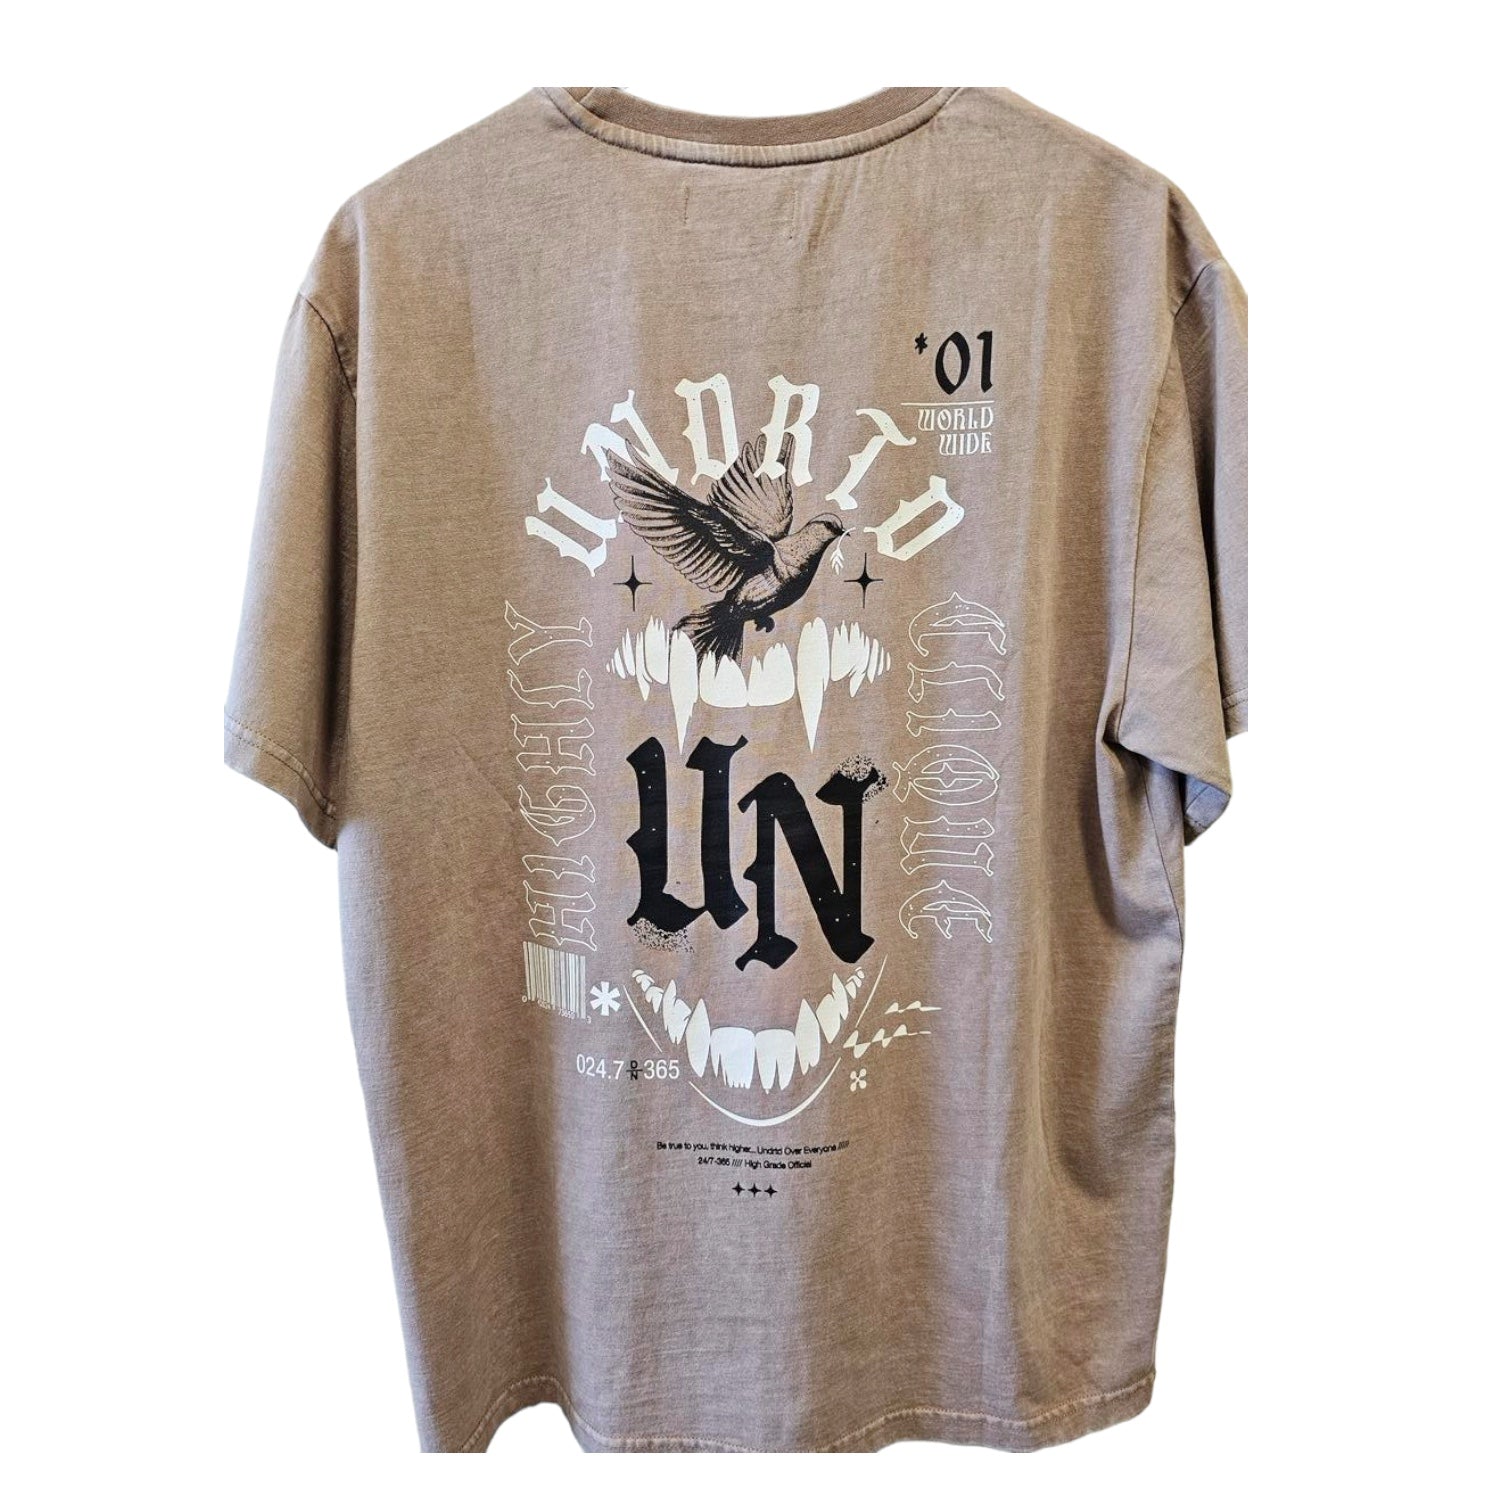 HIGHLY UNDRTD: BOYS Highly Unique SS Tee US4113